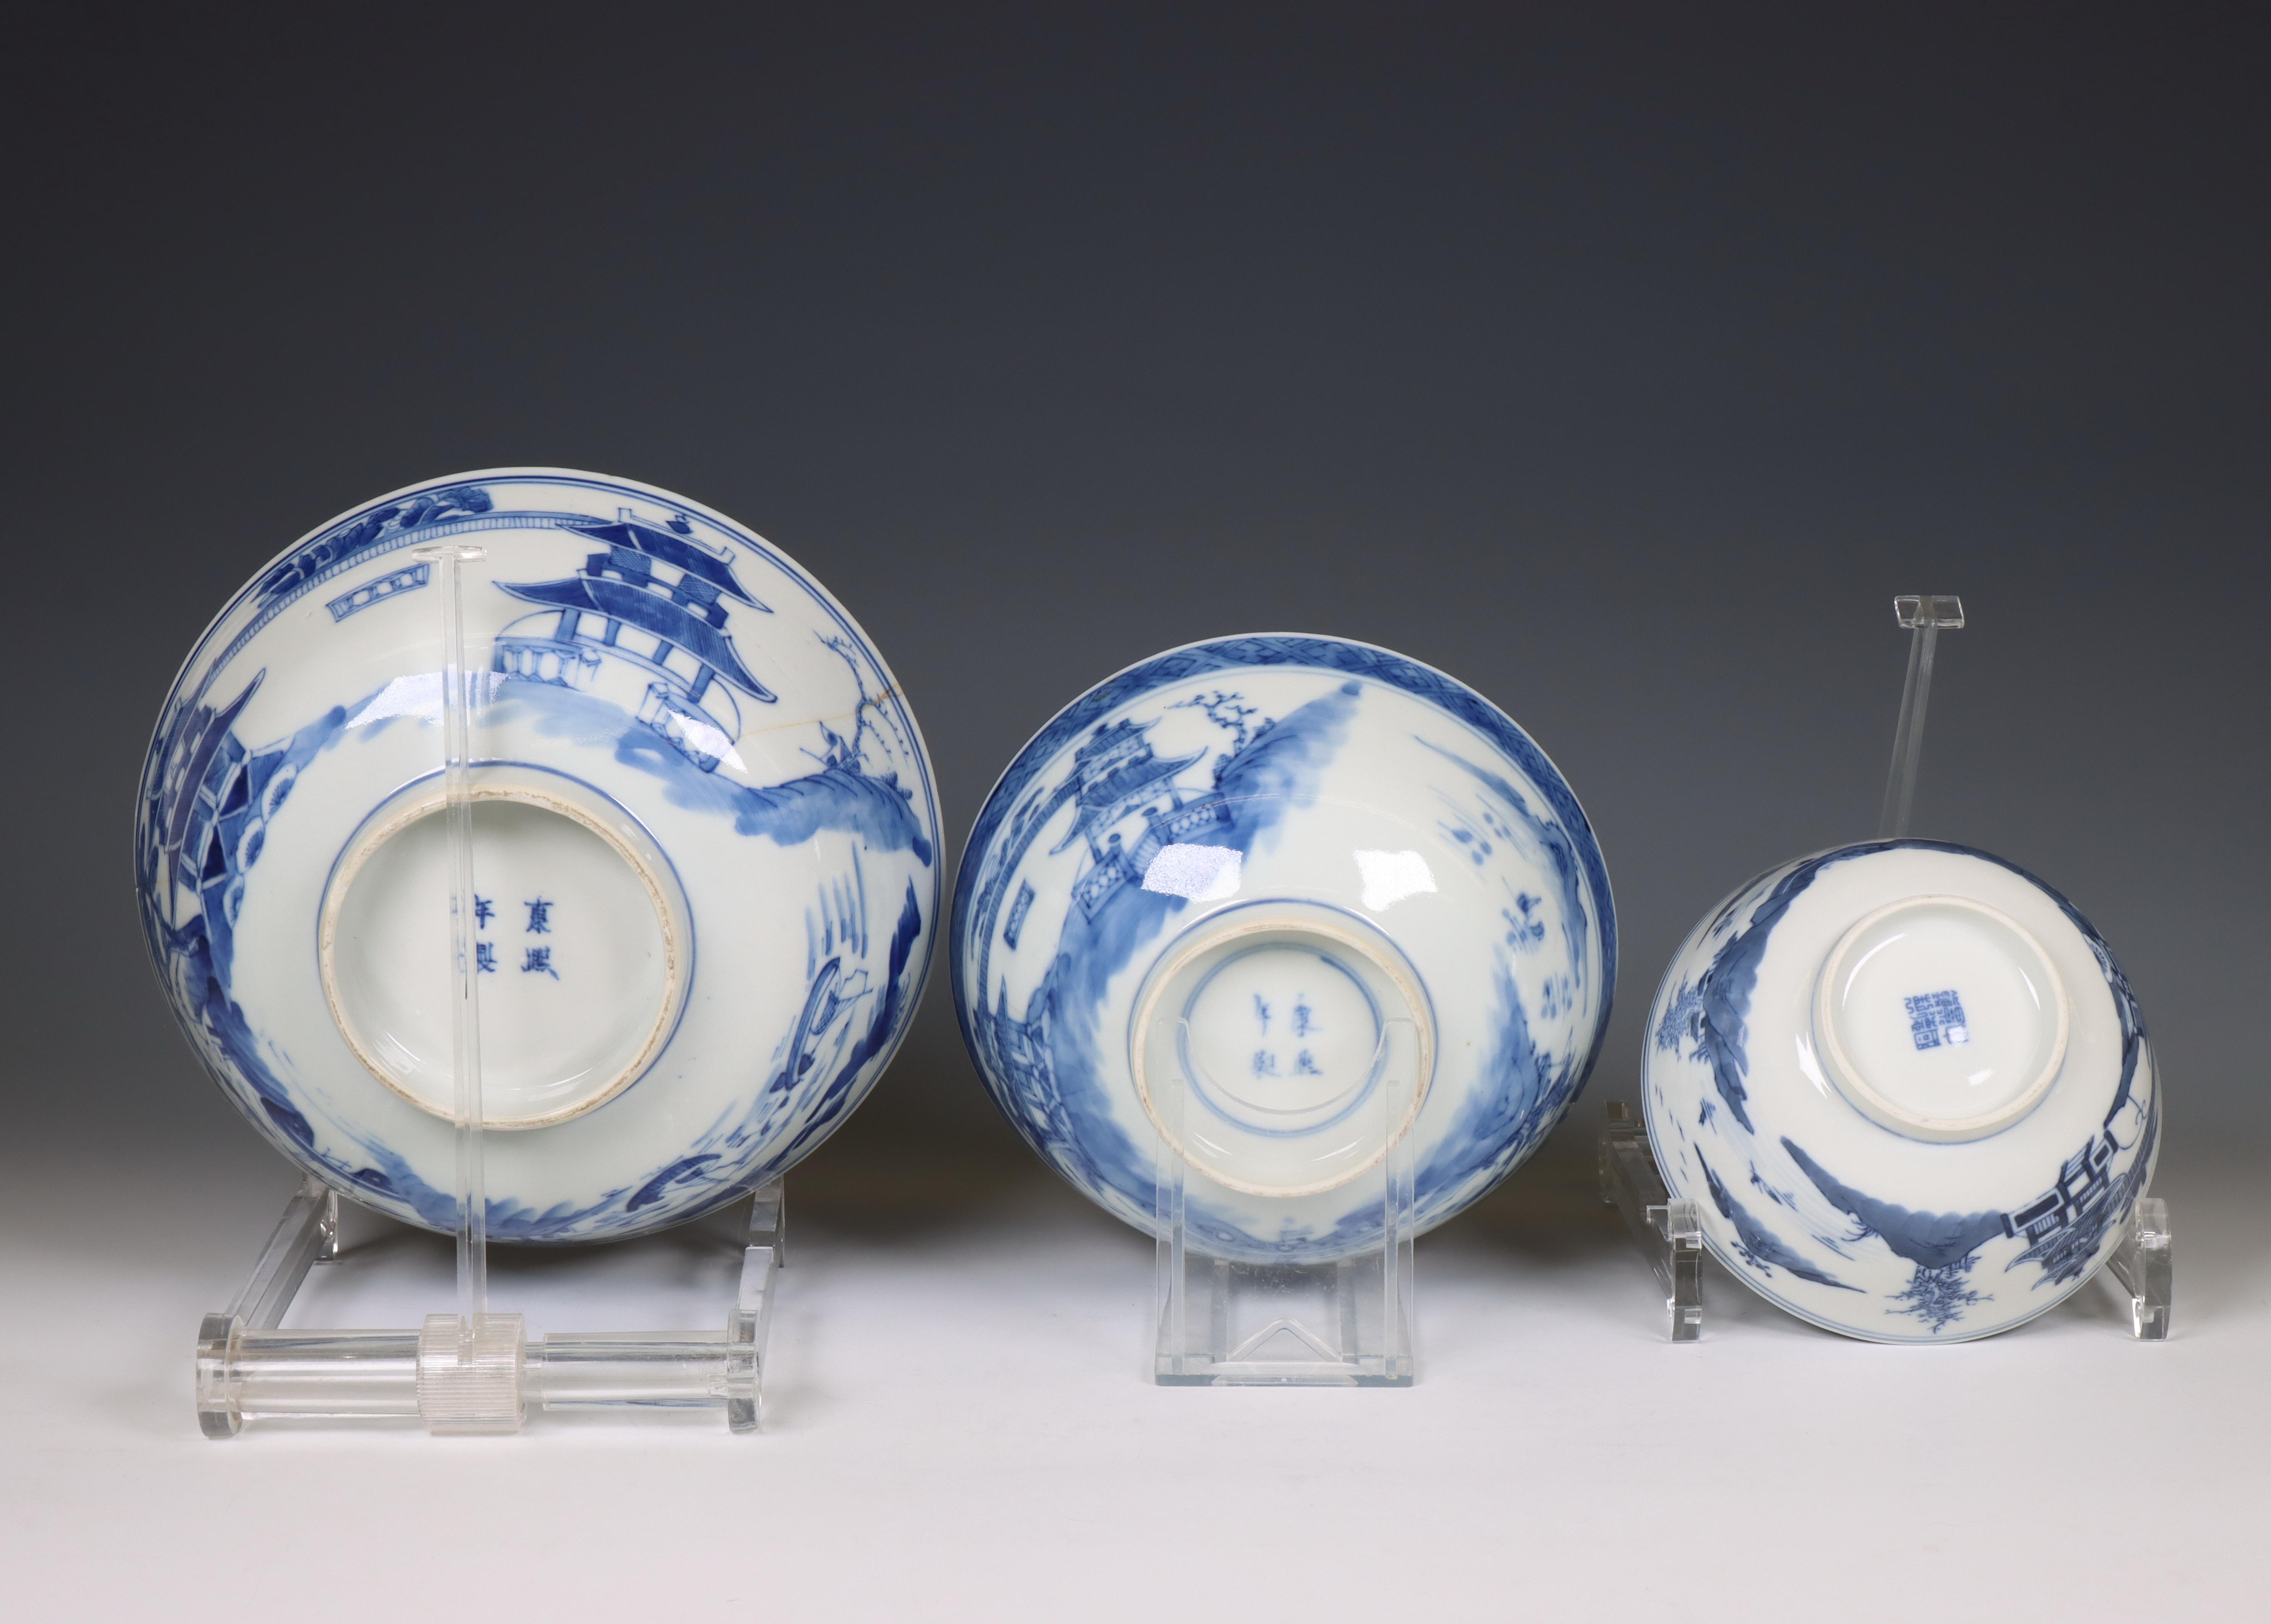 China, three Canton blue and white porcelain bowls, 19th-20th century, - Image 2 of 3